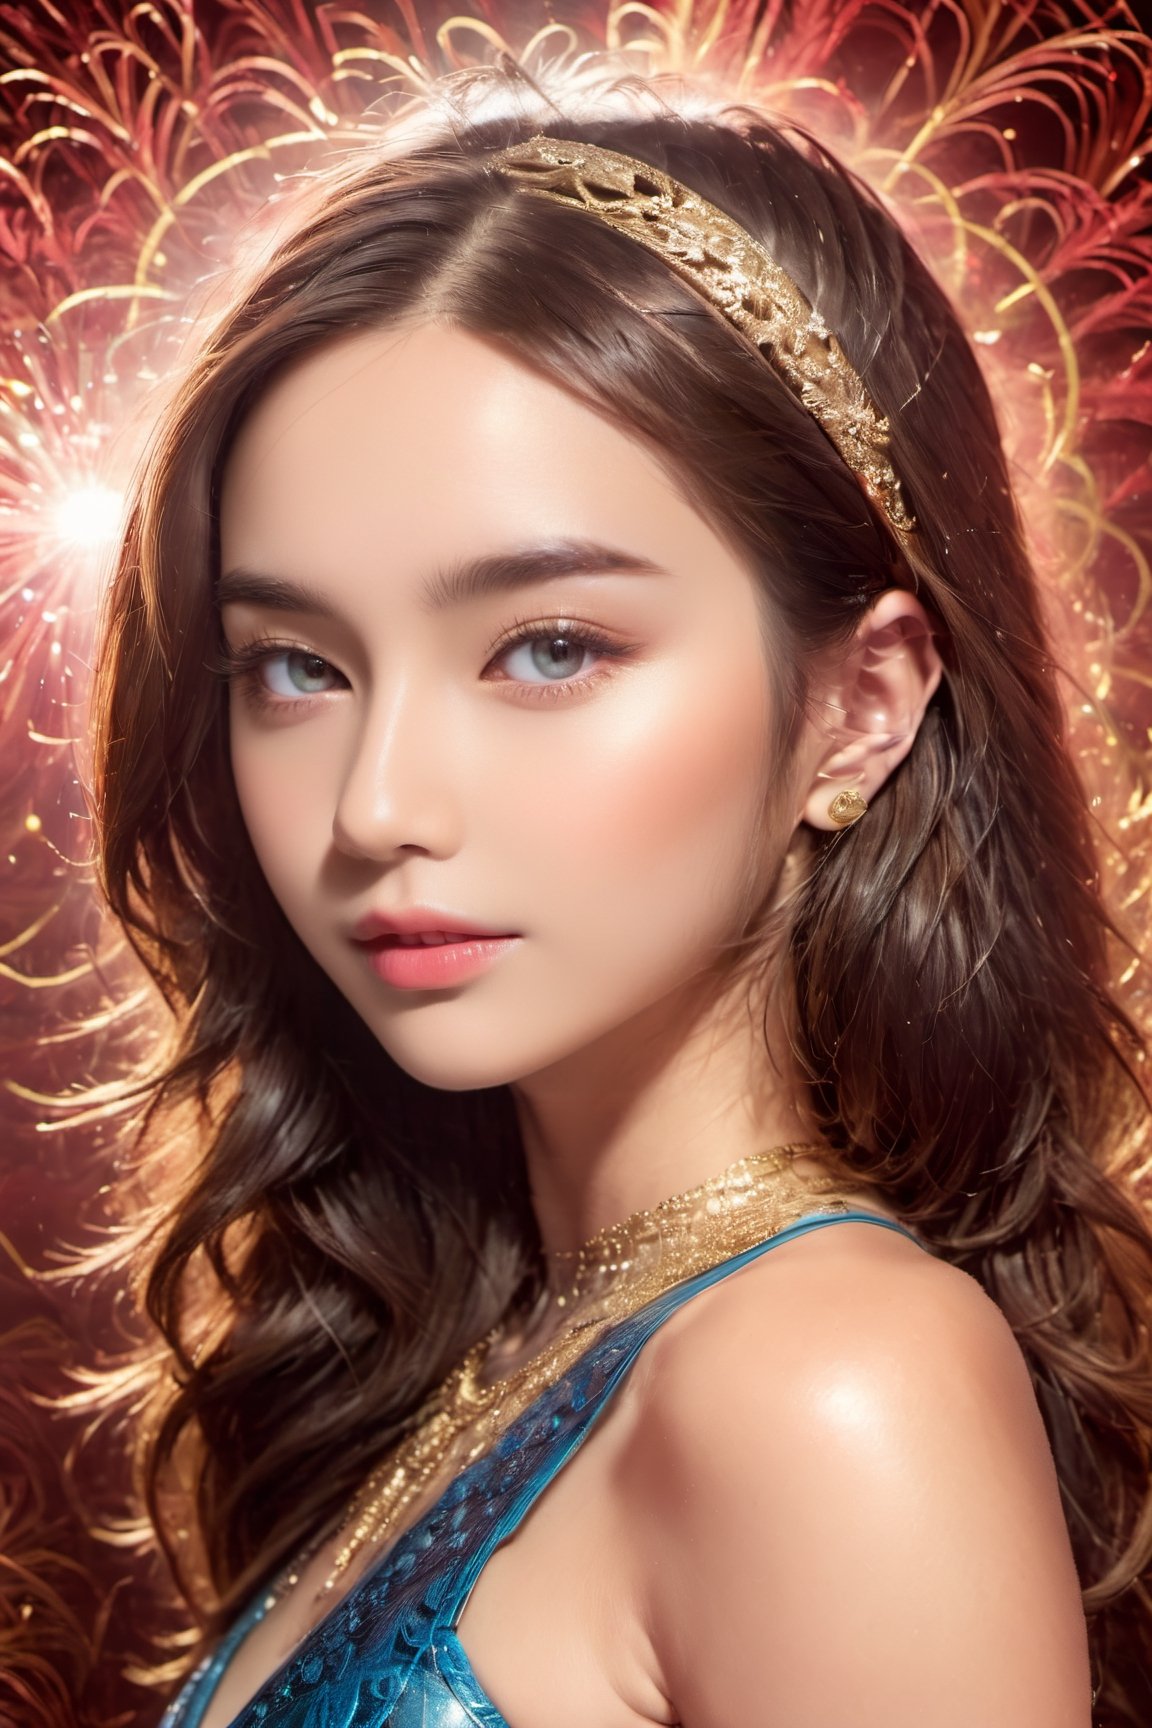 (glamour_photo:1.3) of a beautiful young model\(woman, girl\), (preteen:1.4), 1girl, (blush:0.5), (goosebumps, blemishes:0.5), subsurface scattering, detailed skin texture, textured skin, realistic dull skin noise, visible skin detail, skin fuzz, dry skin, perfect fingers & hands, realistic fingernails, feminine tone, absolute_cleavage, BREAK wearing Sheer lace bodysuit and high-waisted faux leather shorts, exposed_navel, BREAK RAW Photo, (photorealistic, photorealism, realistic:1.3), SFW, (upper_body framing from hips:1.6), Sexy_Pose, (New_Year:1.4), shot on ALEXA 65 camera, using Fujicolor Pro Film, Enhanced All,